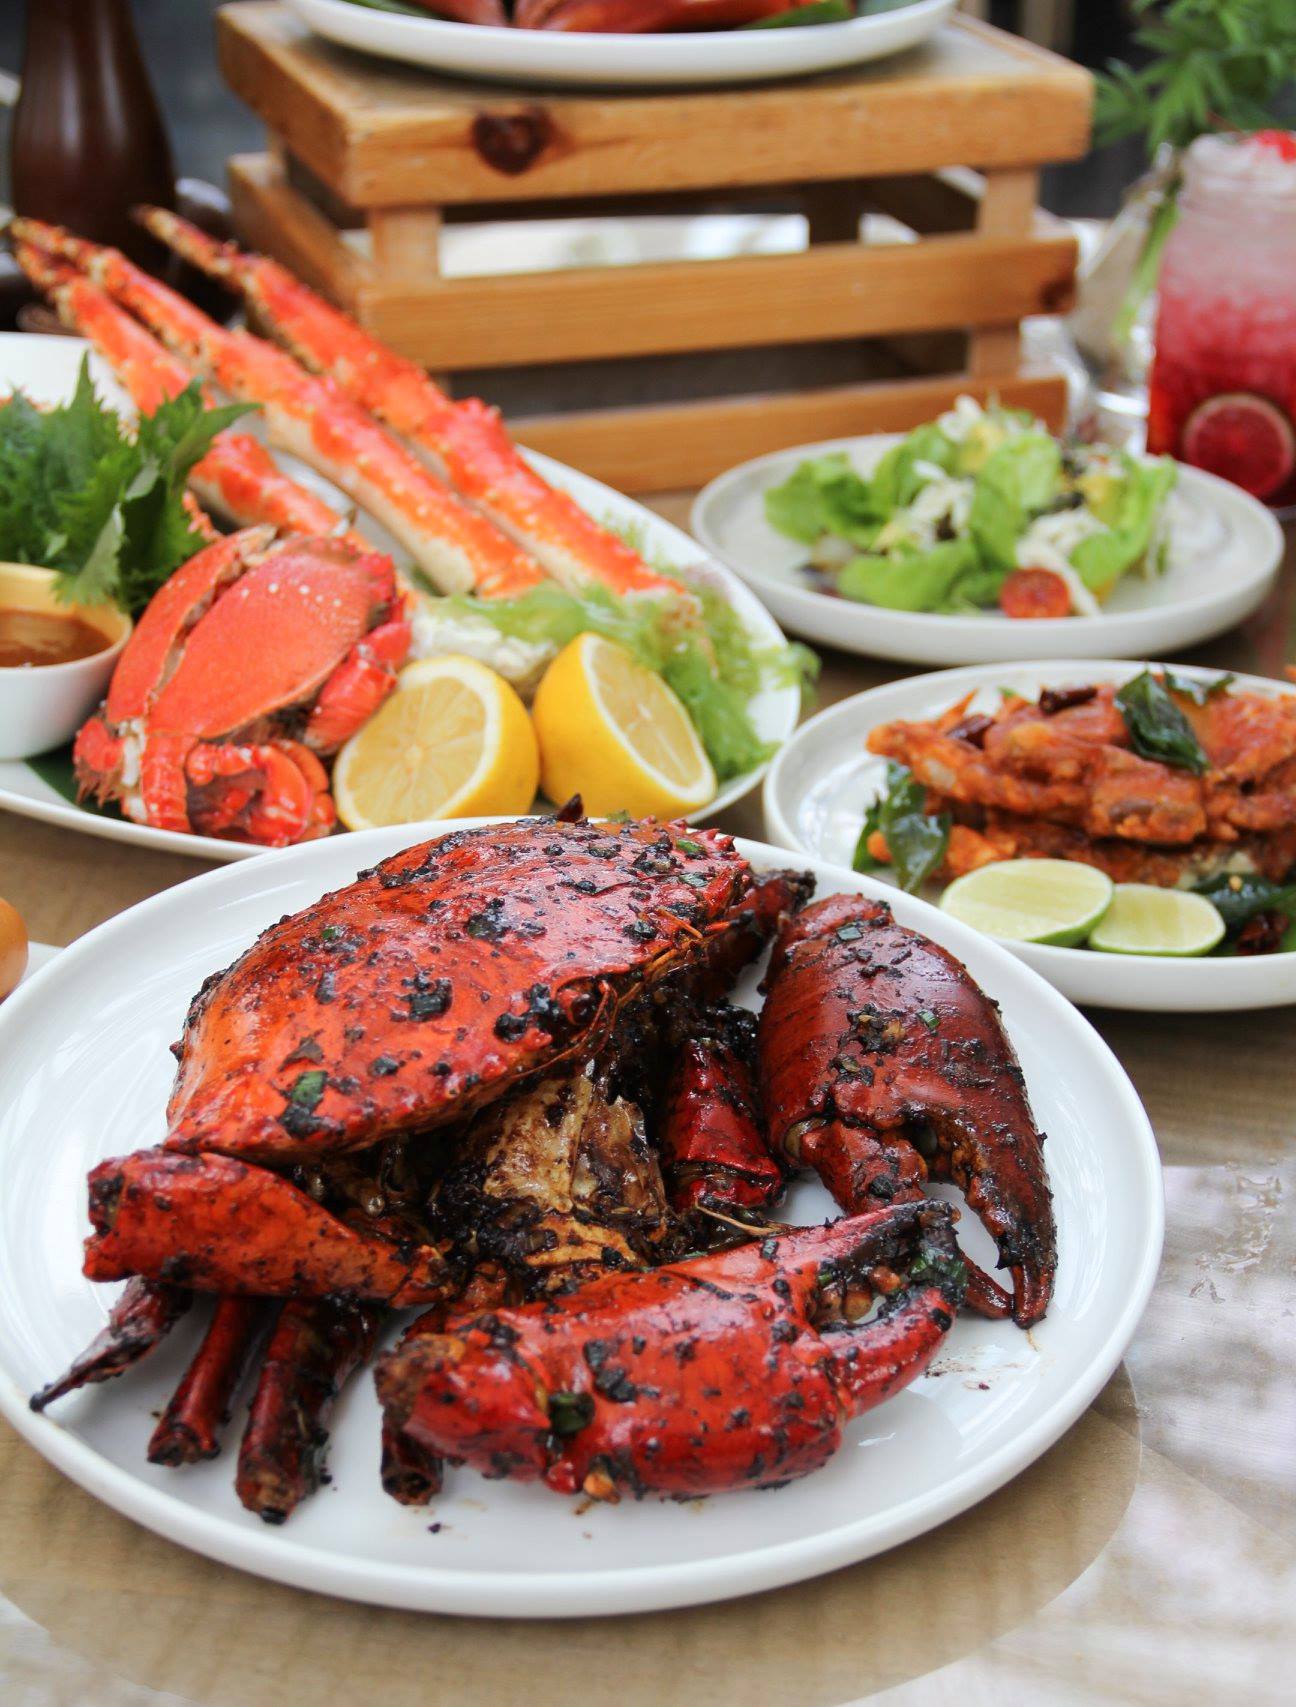 Rise Restaurant offering All-You-Can-Eat Crab Buffet From 14 – 20